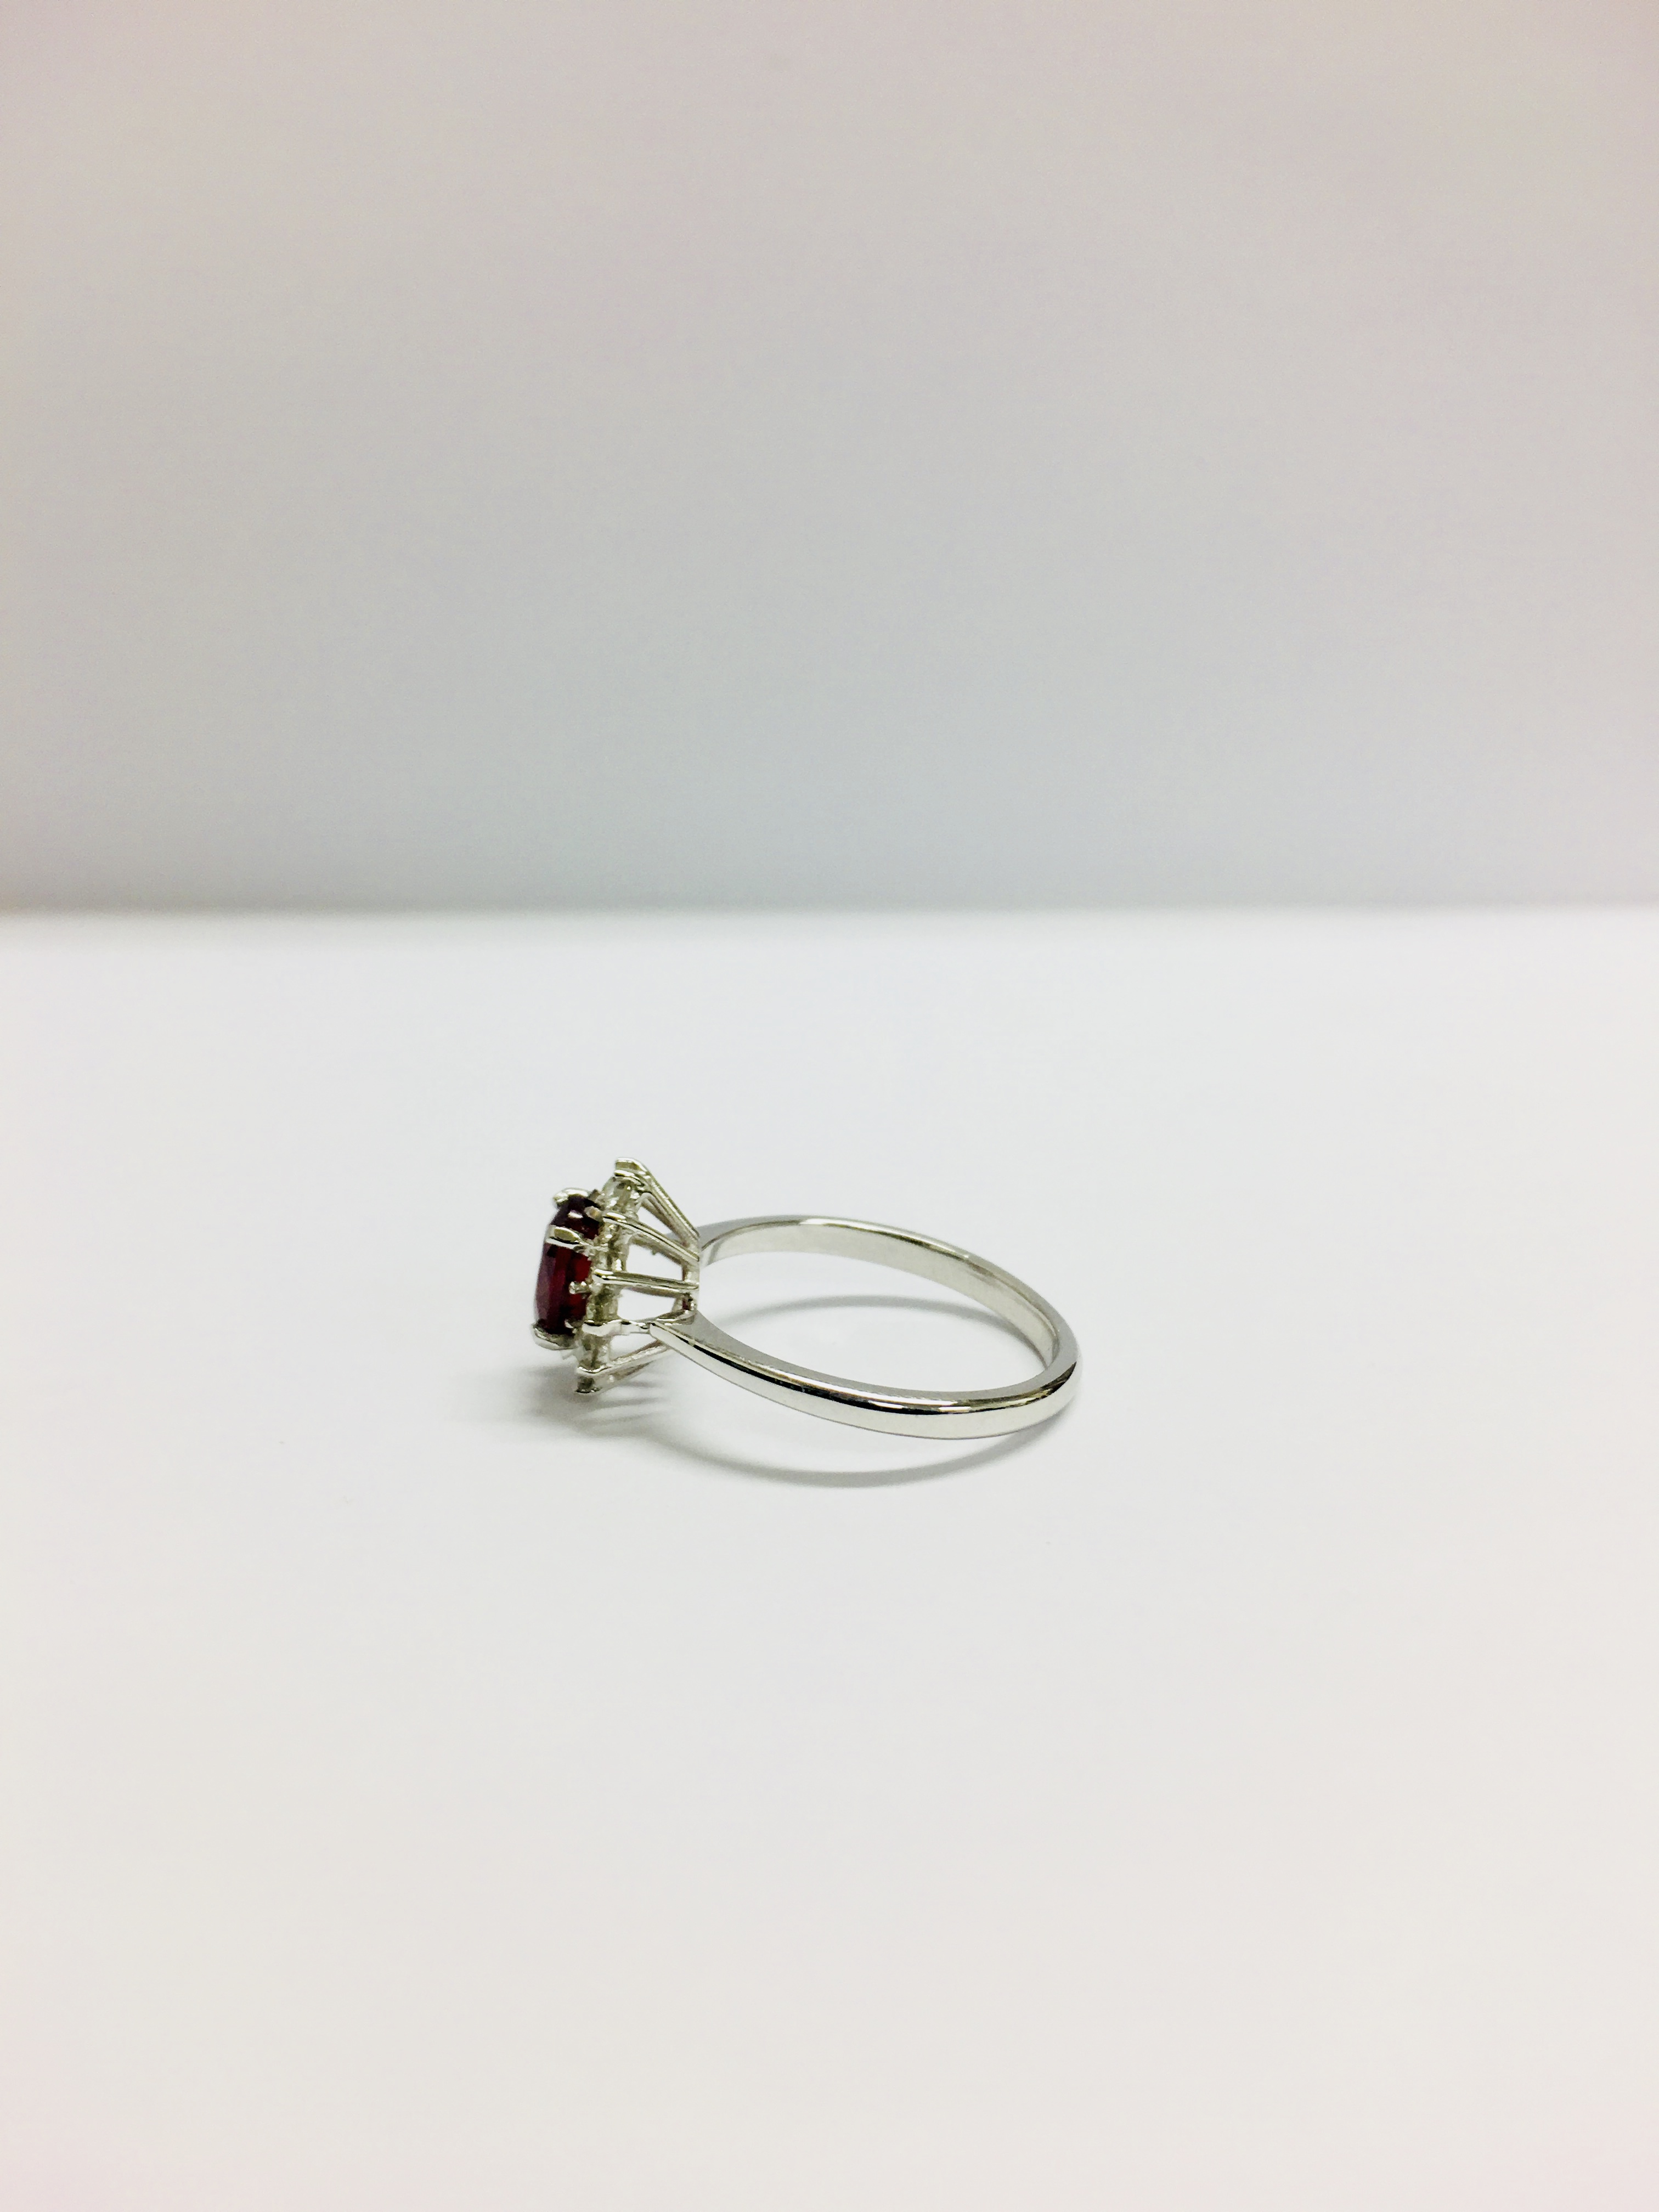 0.80Ct Ruby And Diamond Cluster Ring Set With A Oval Cut(Glass Filled) Ruby - Image 2 of 9